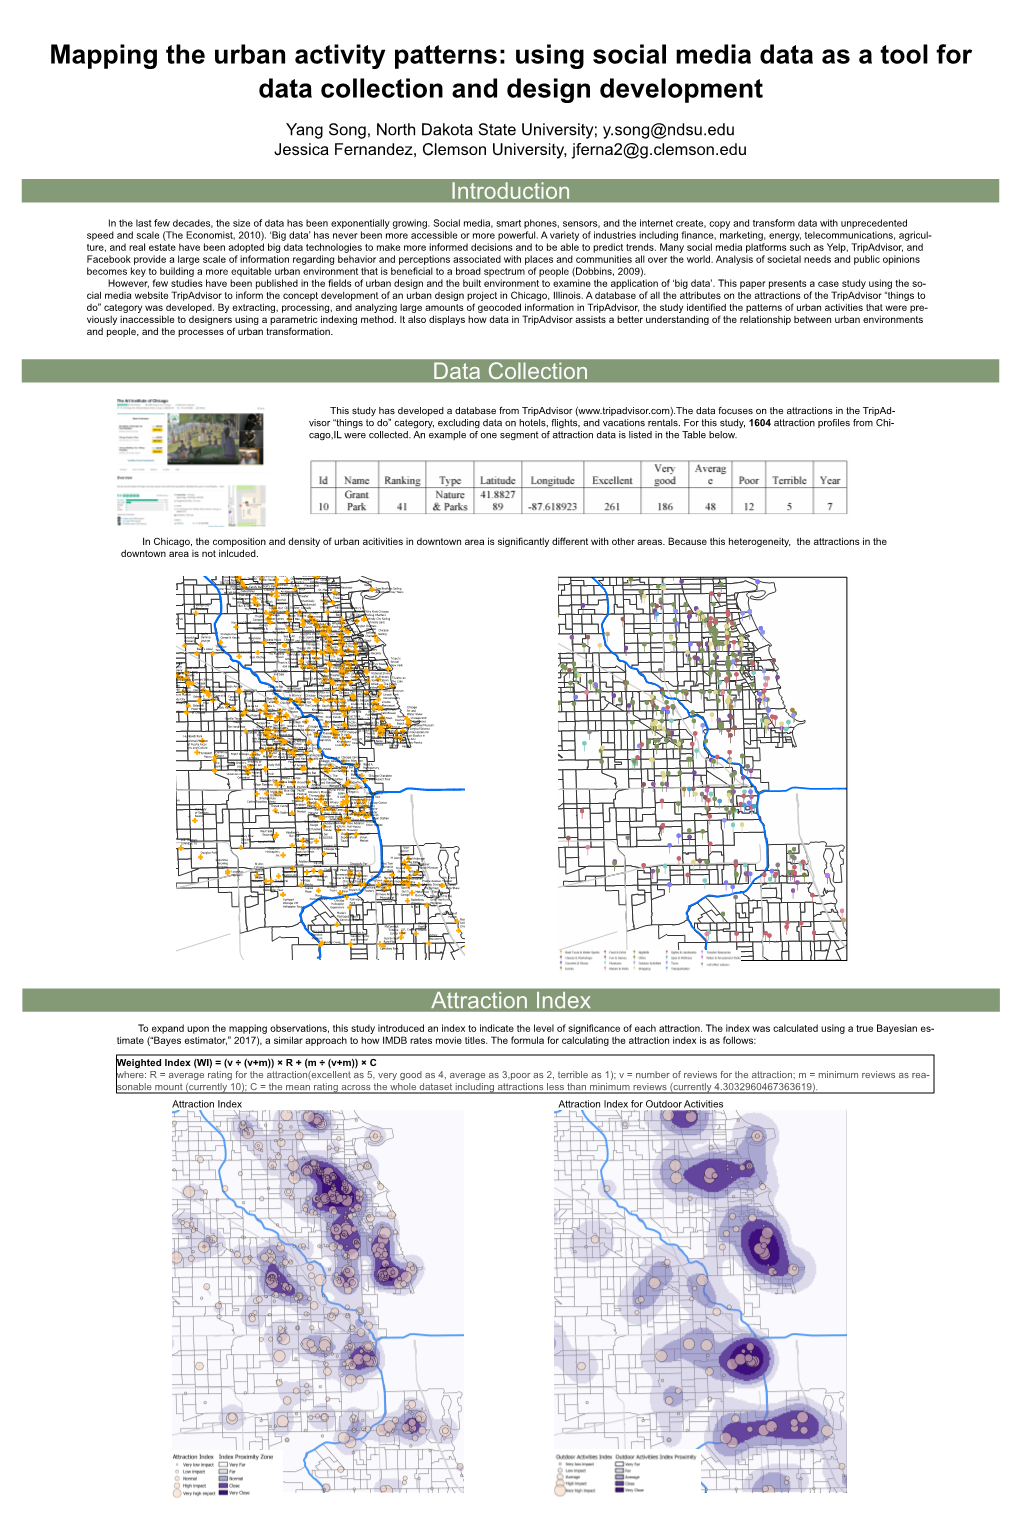 Mapping the Urban Activity Patterns: Using Social Media Data As a Tool for Data Collection and Design Development